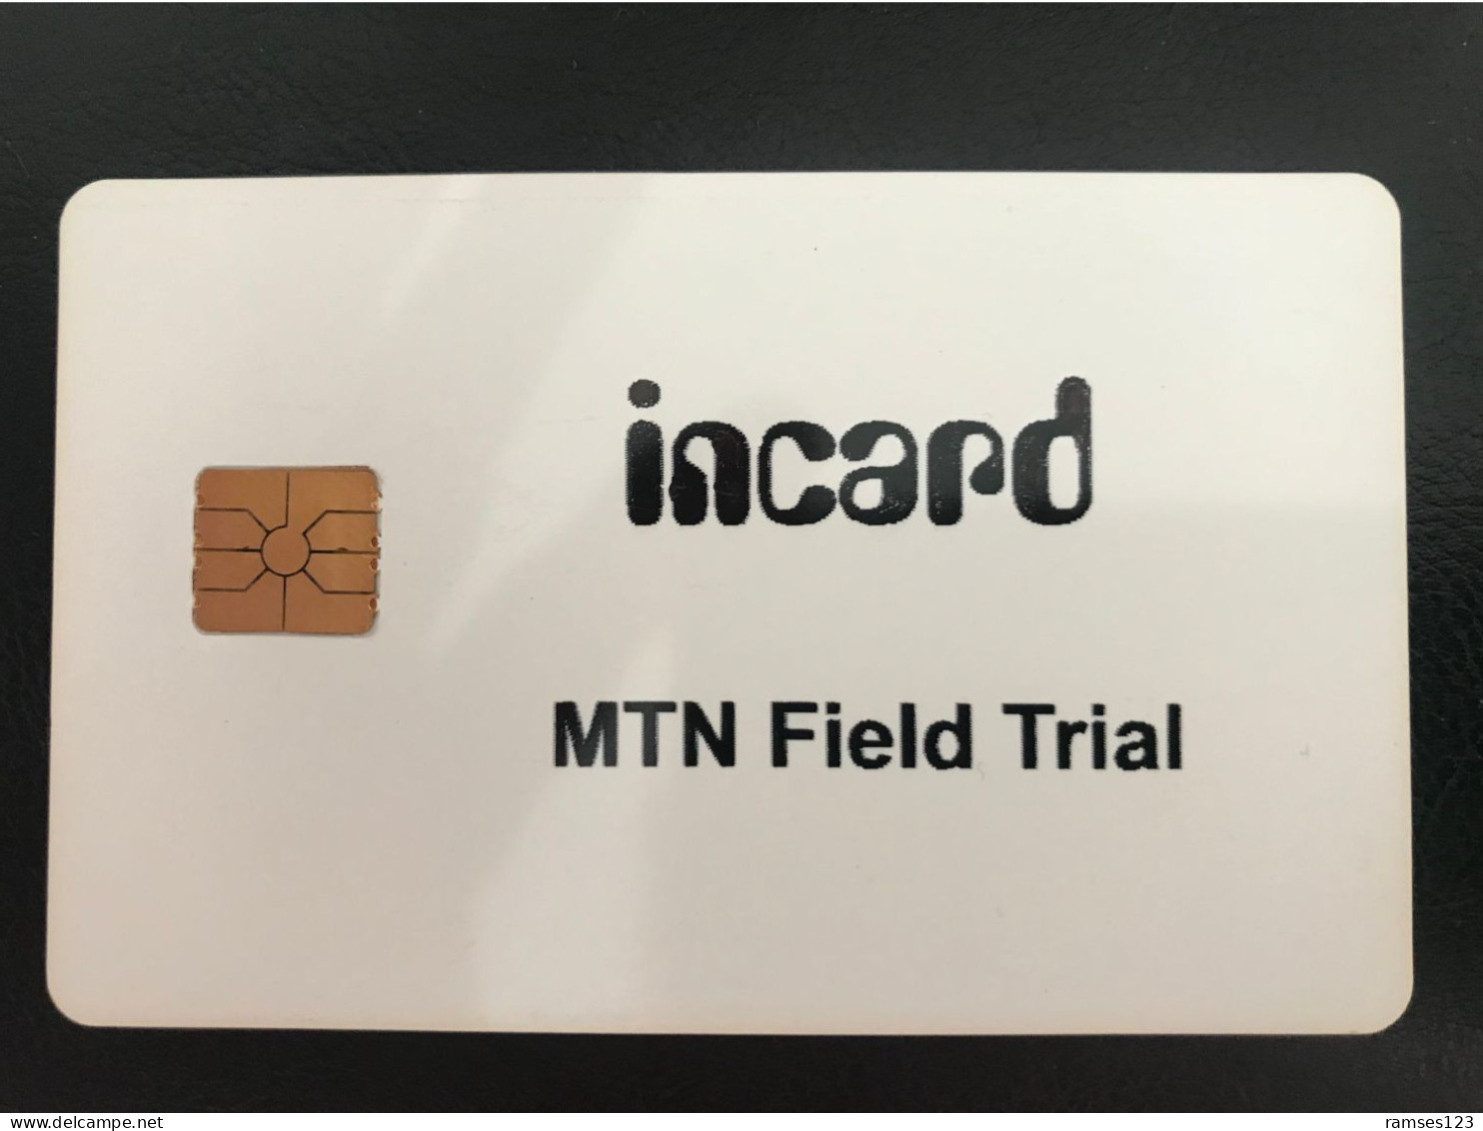 SOUTH AFRICA - Chip - INCARD - MTN Field Trial - VERY RARE - Afrique Du Sud